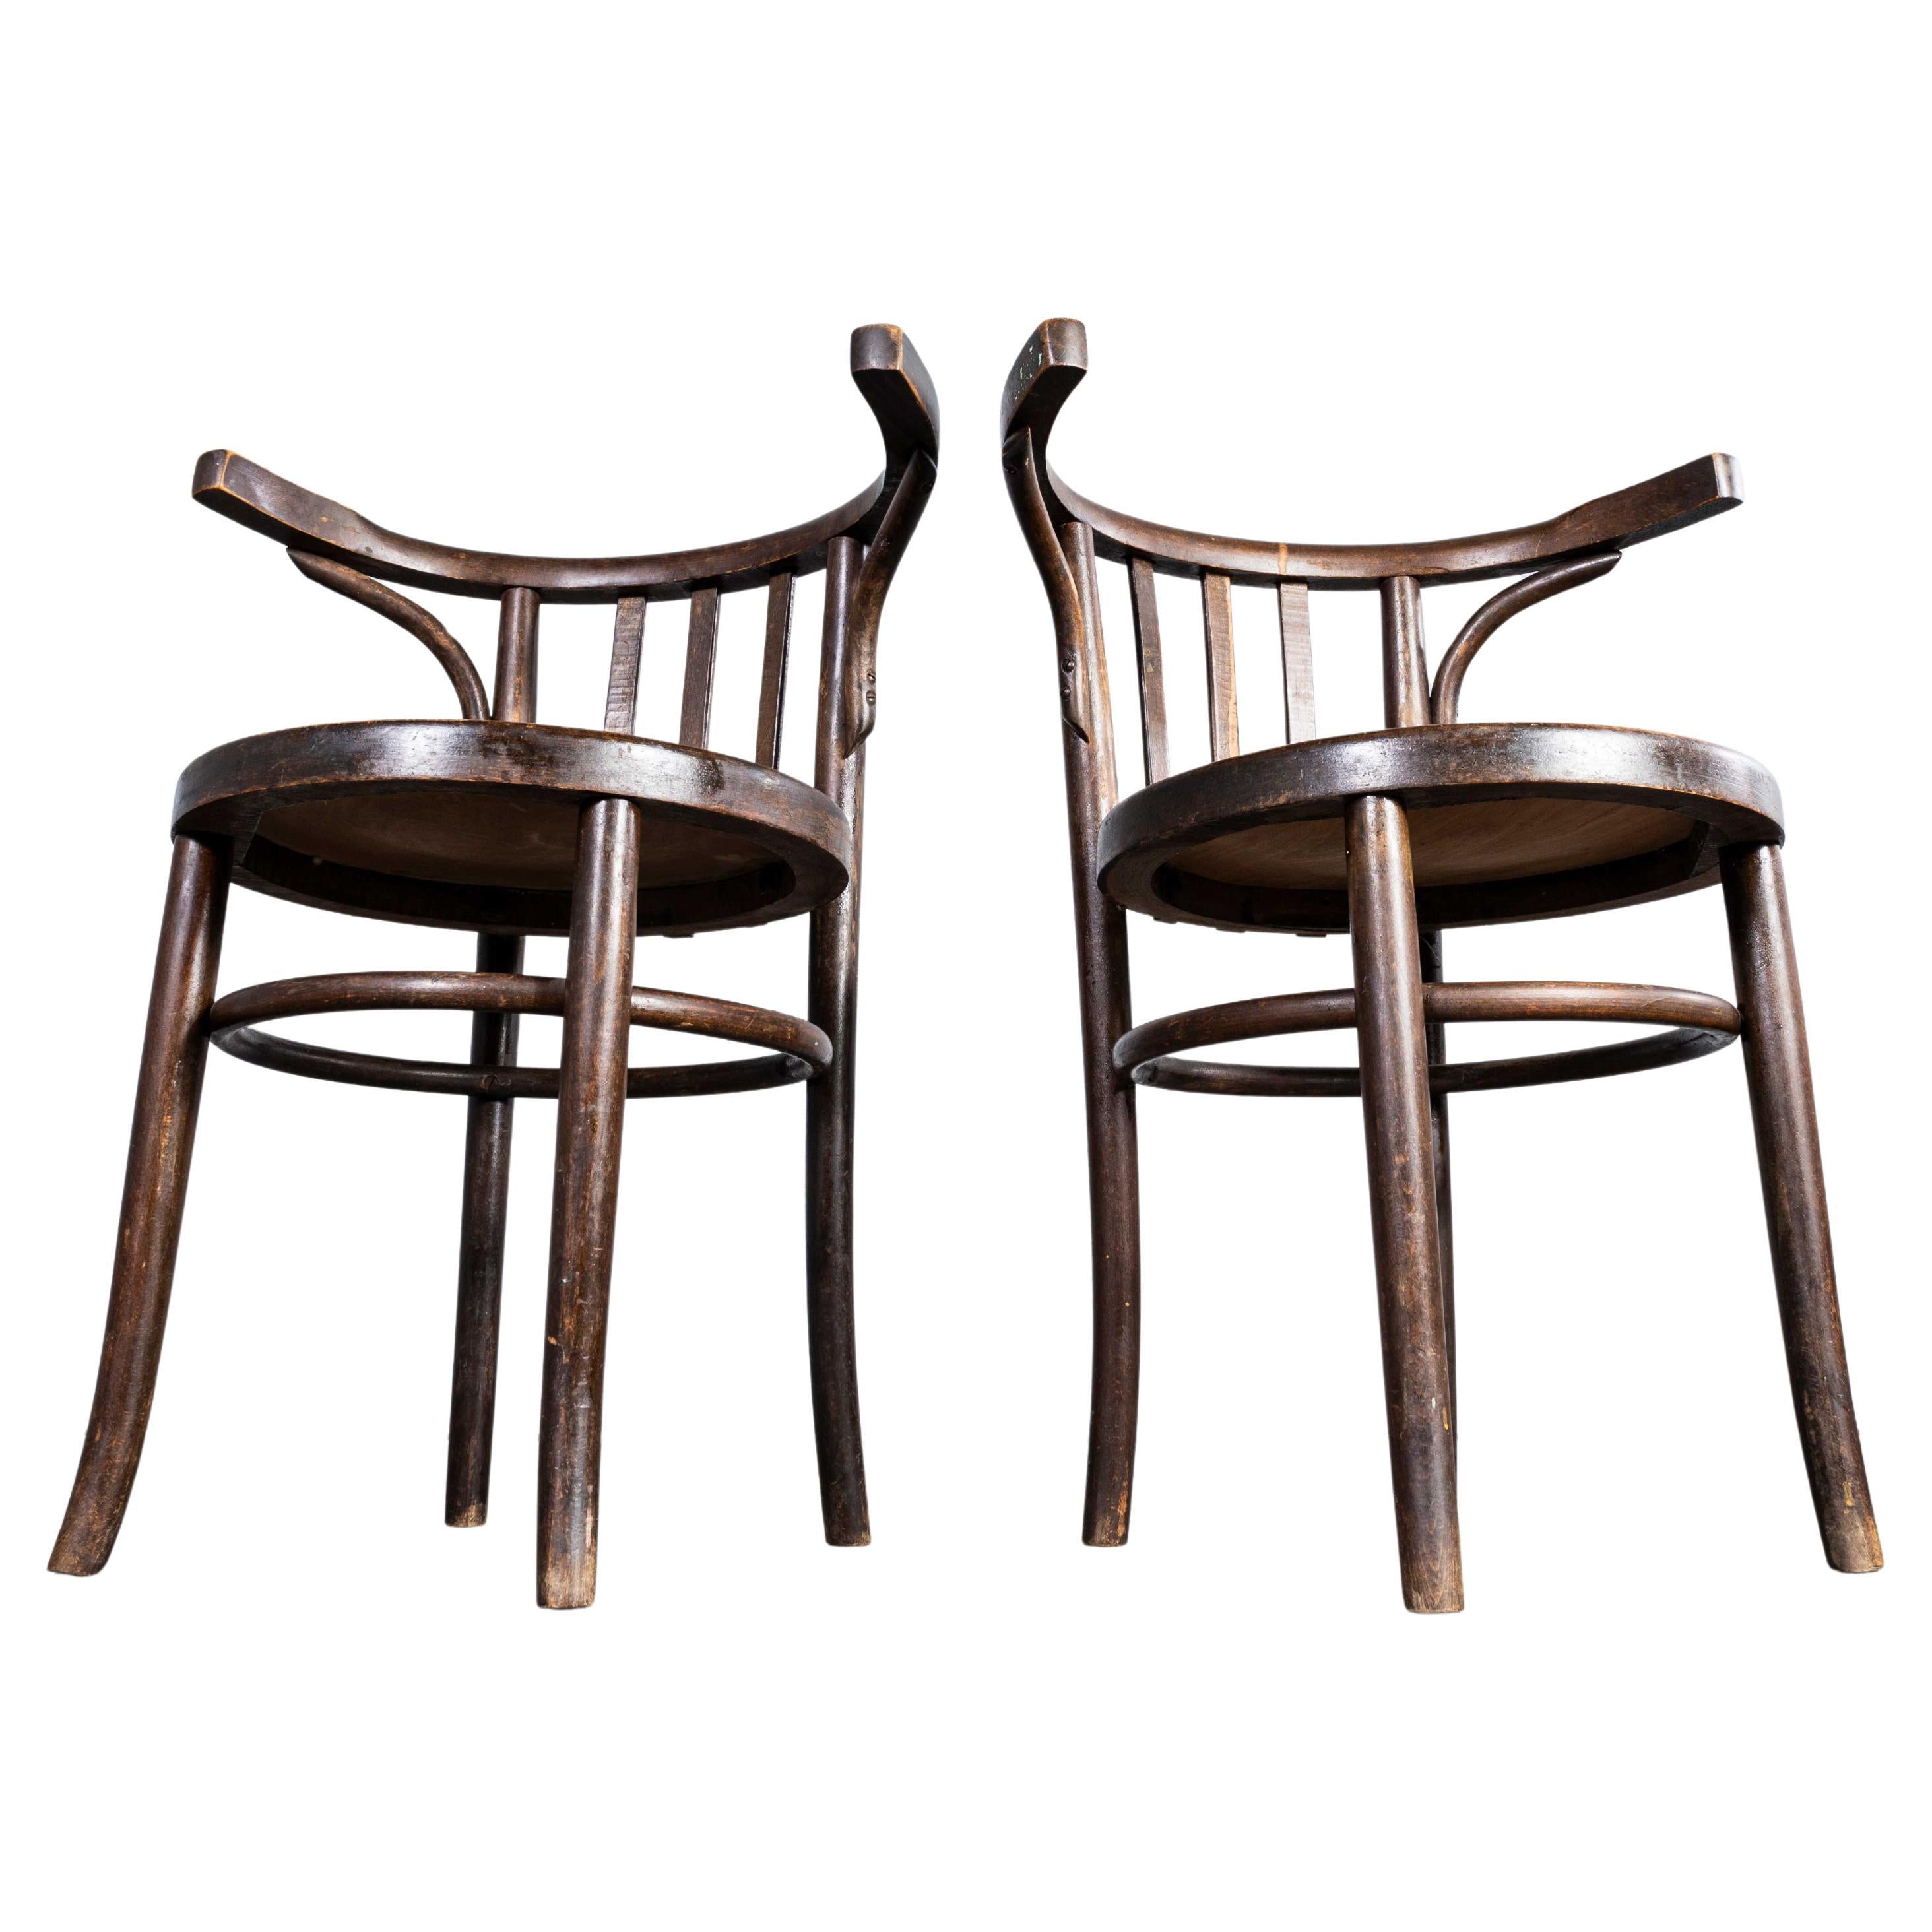 1940’s Bentwood Debrecen Crescent Back Dining Chairs – Pair